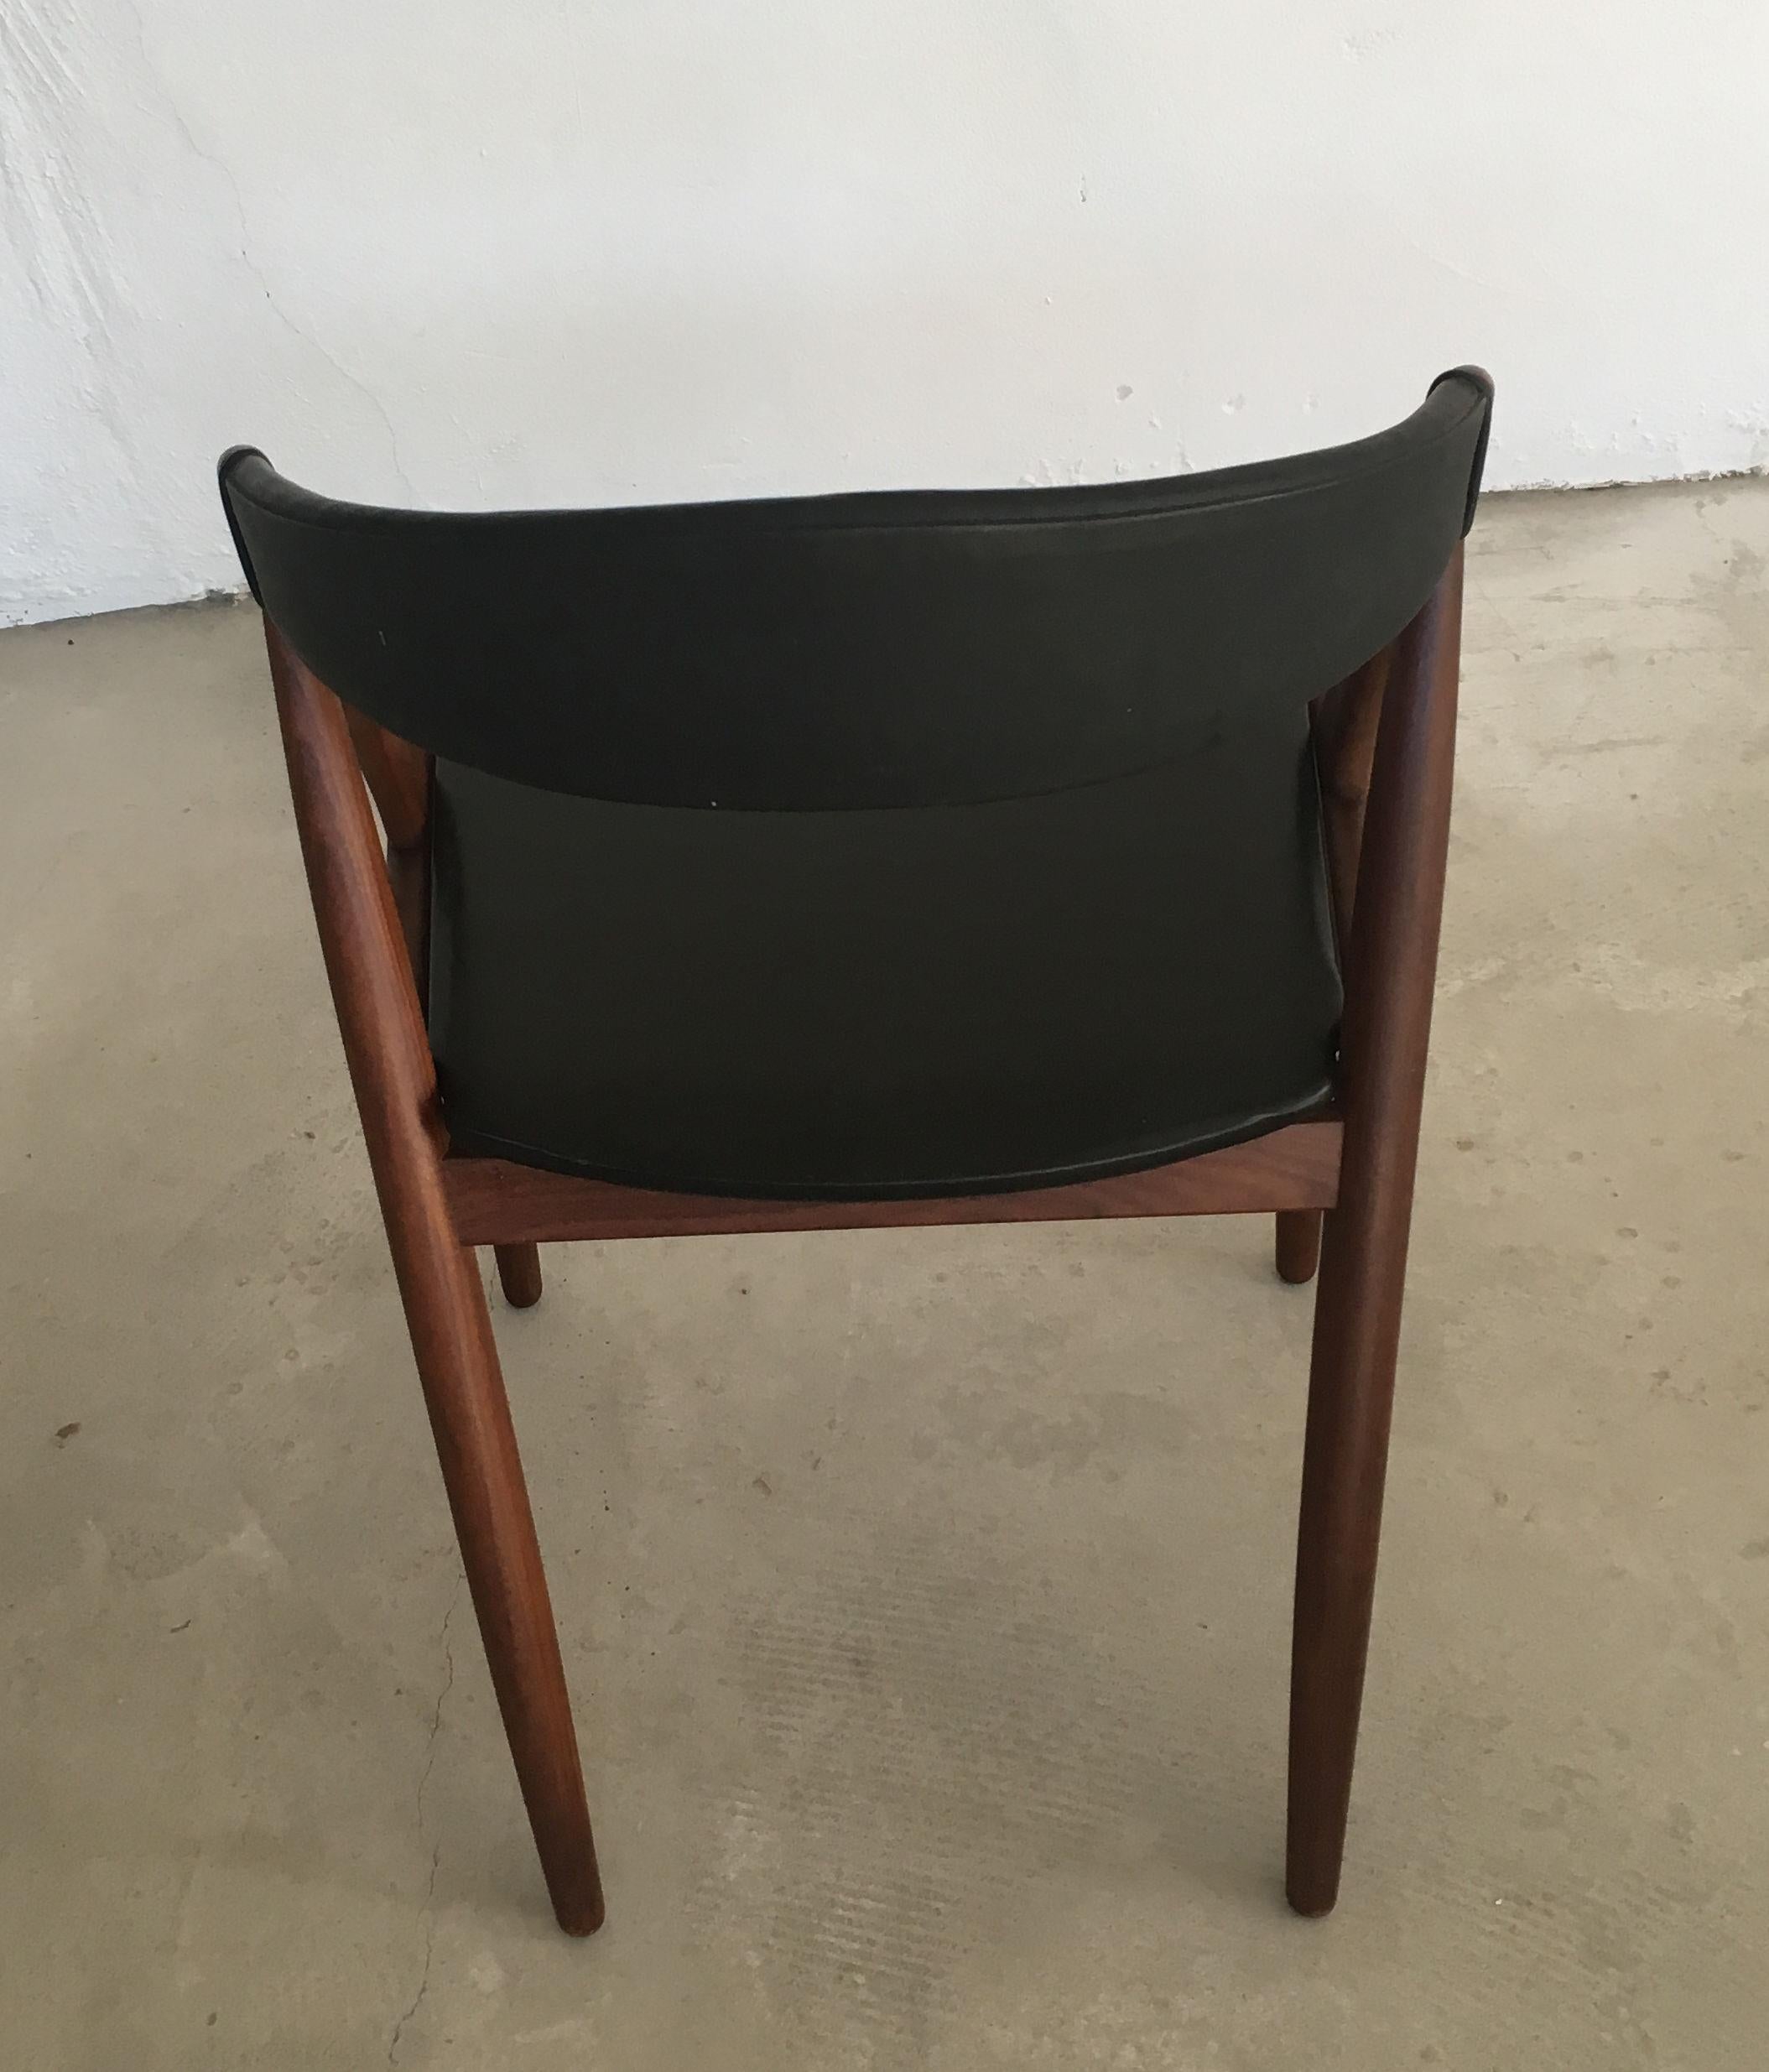 1960s Kai Kristiansen Fully Restored Dining Chairs in Teak and Black Leather In Good Condition For Sale In Knebel, DK